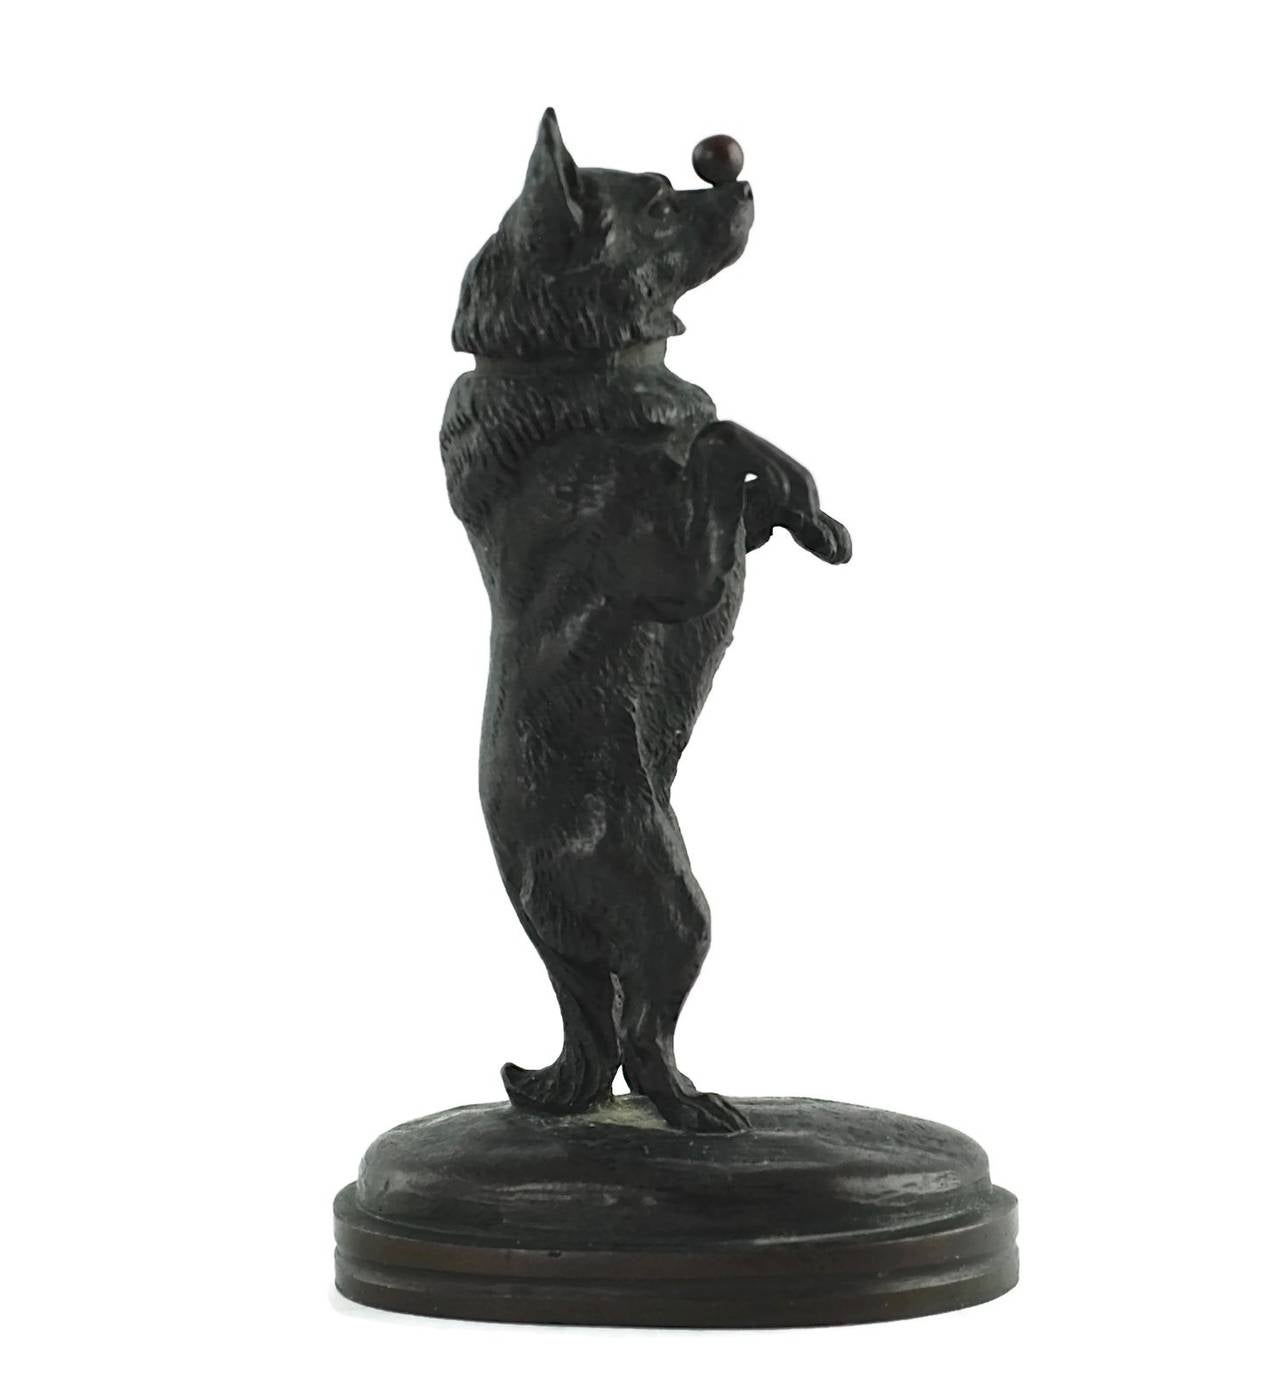 This bronze sculpture is by French artist, Joseph Victor Chemin (1825-1901). Chemin is particularly well known for his realistically modeled bronze dogs shown at work and at play. This circa 1870 piece is titled 'Chien au Sucre' translated as 'Sugar